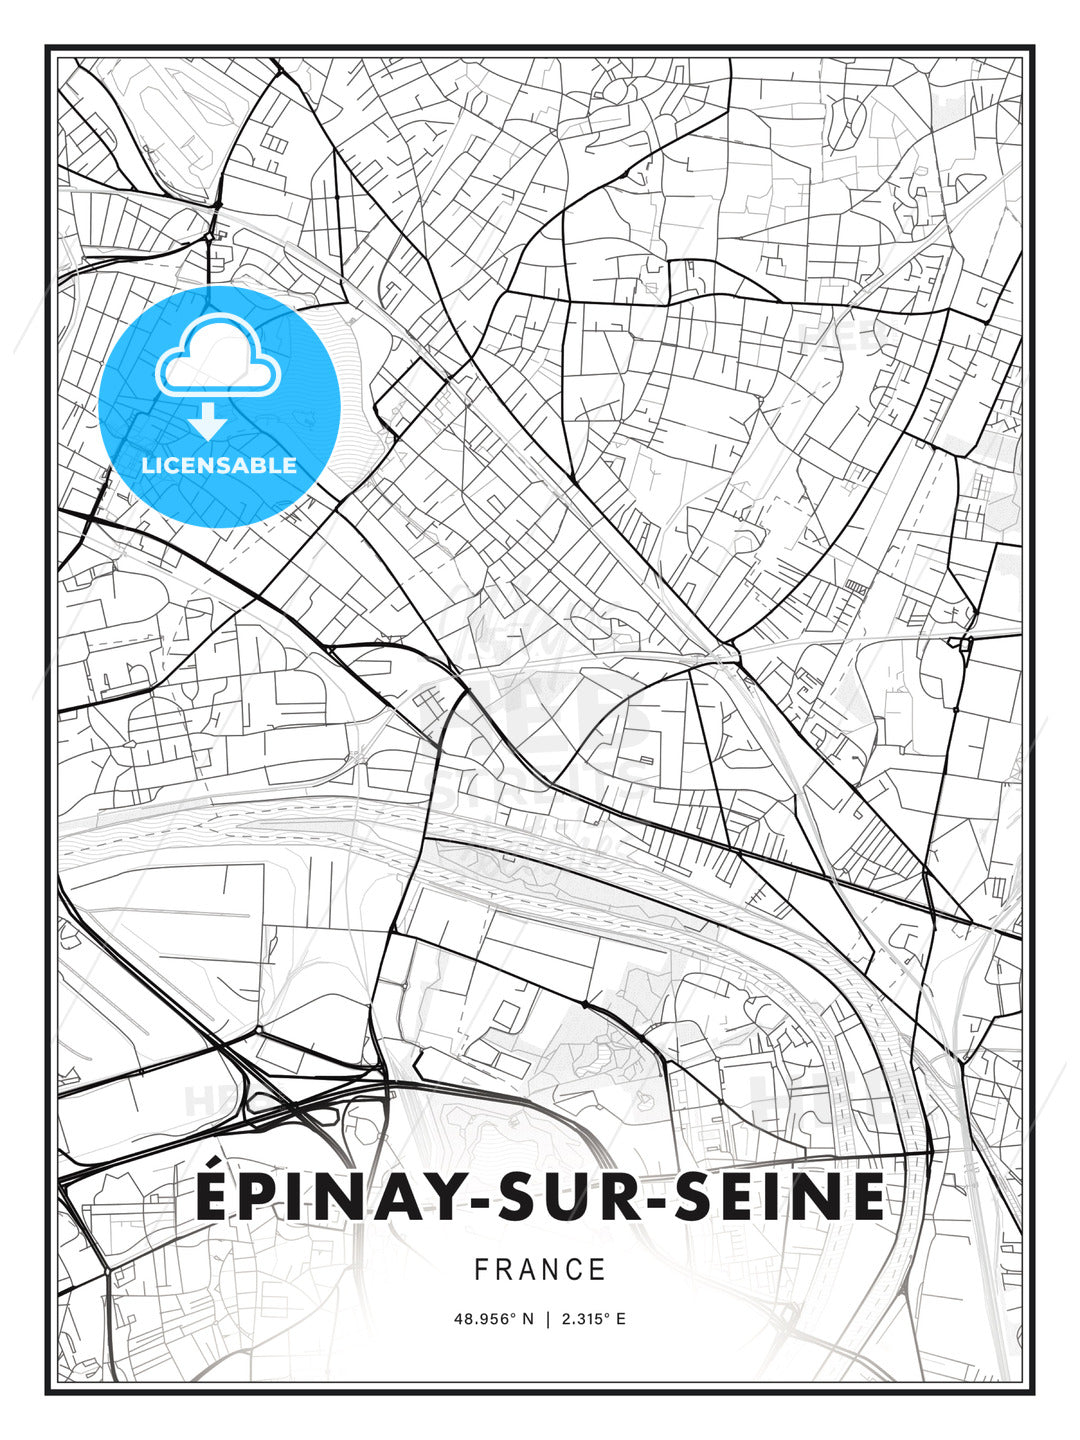 Épinay-sur-Seine, France, Modern Print Template in Various Formats - HEBSTREITS Sketches